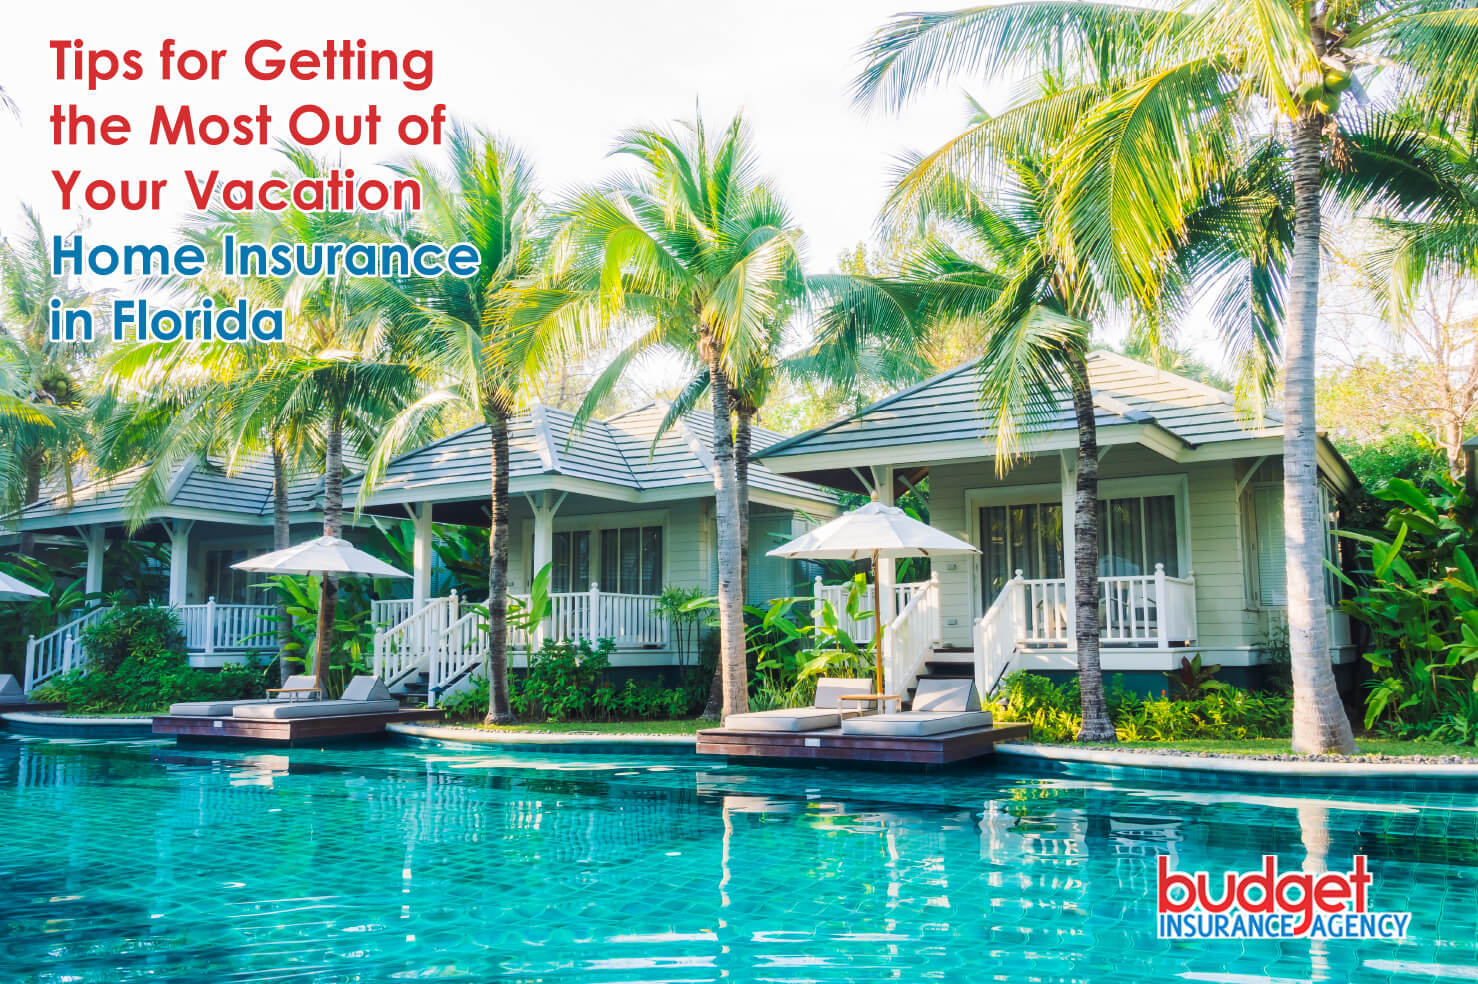 Tips for Getting the Most Out of Your Vacation Home Insurance in Florida